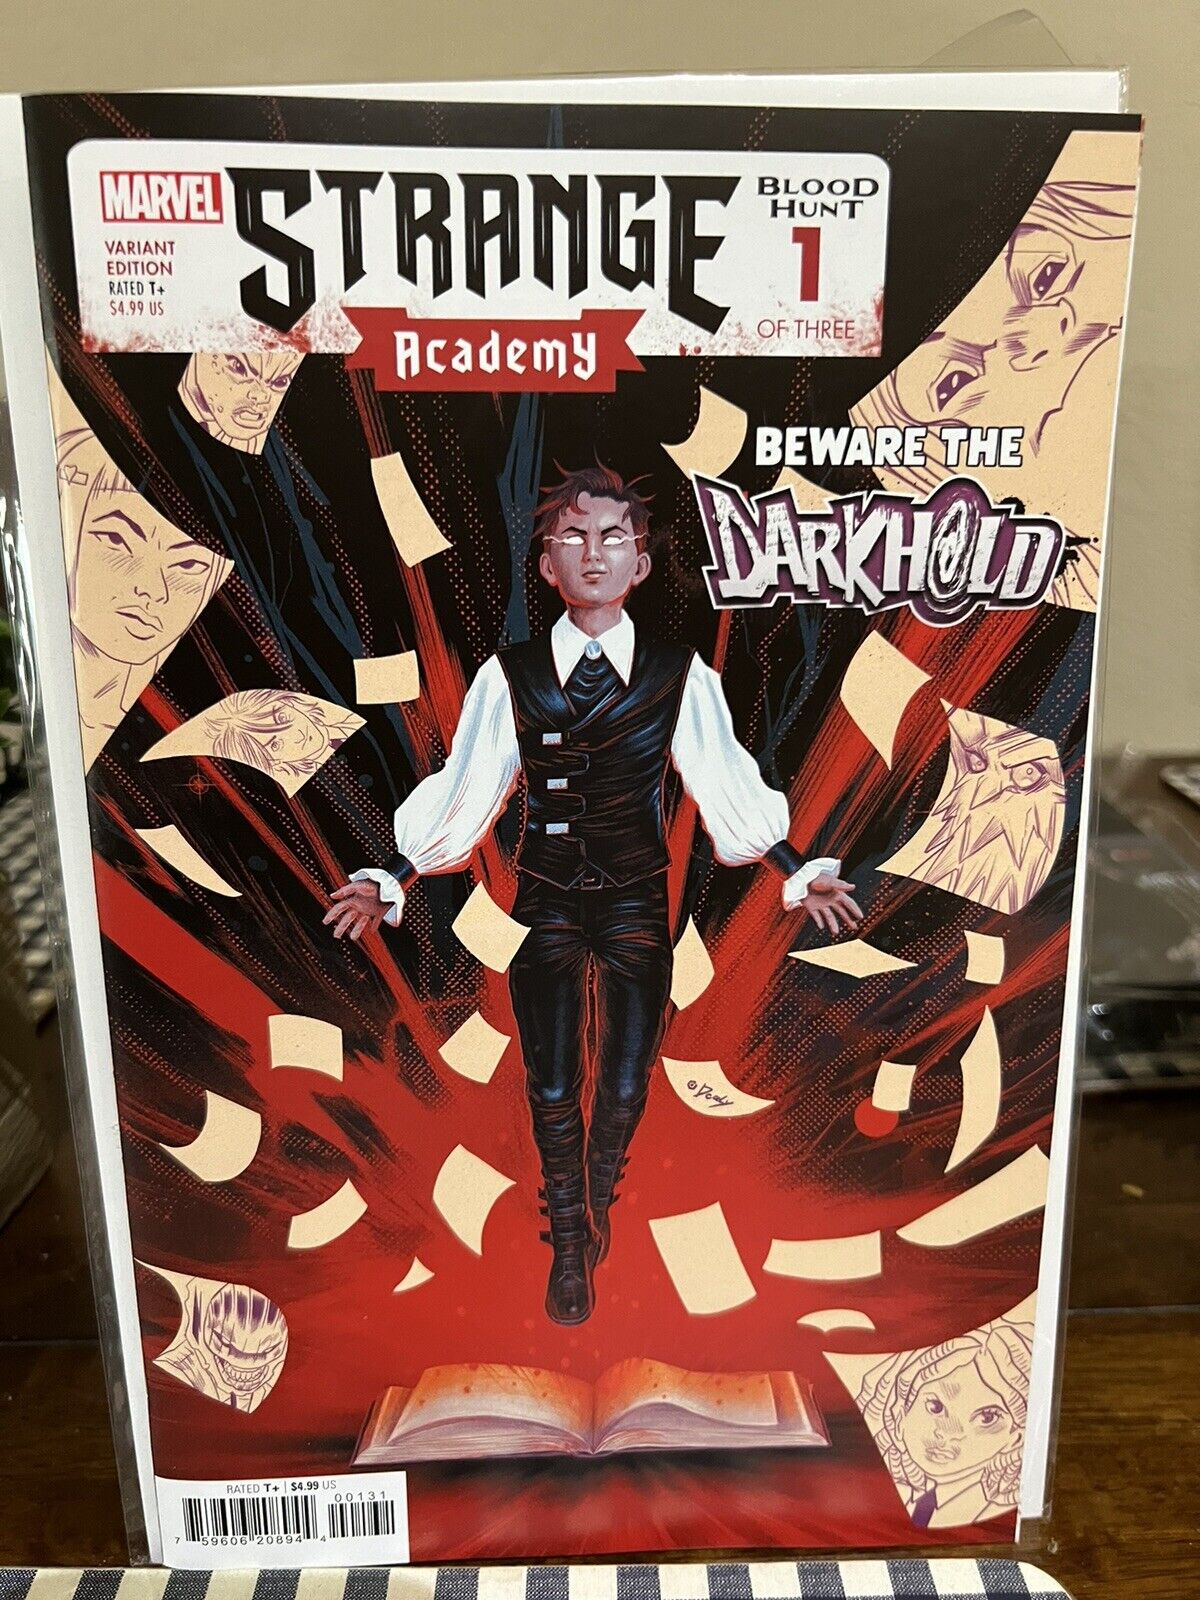 STRANGE ACADEMY: BLOOD HUNT #1 (2024) DOALY VARIANT 1ST APPEARANCE PAI